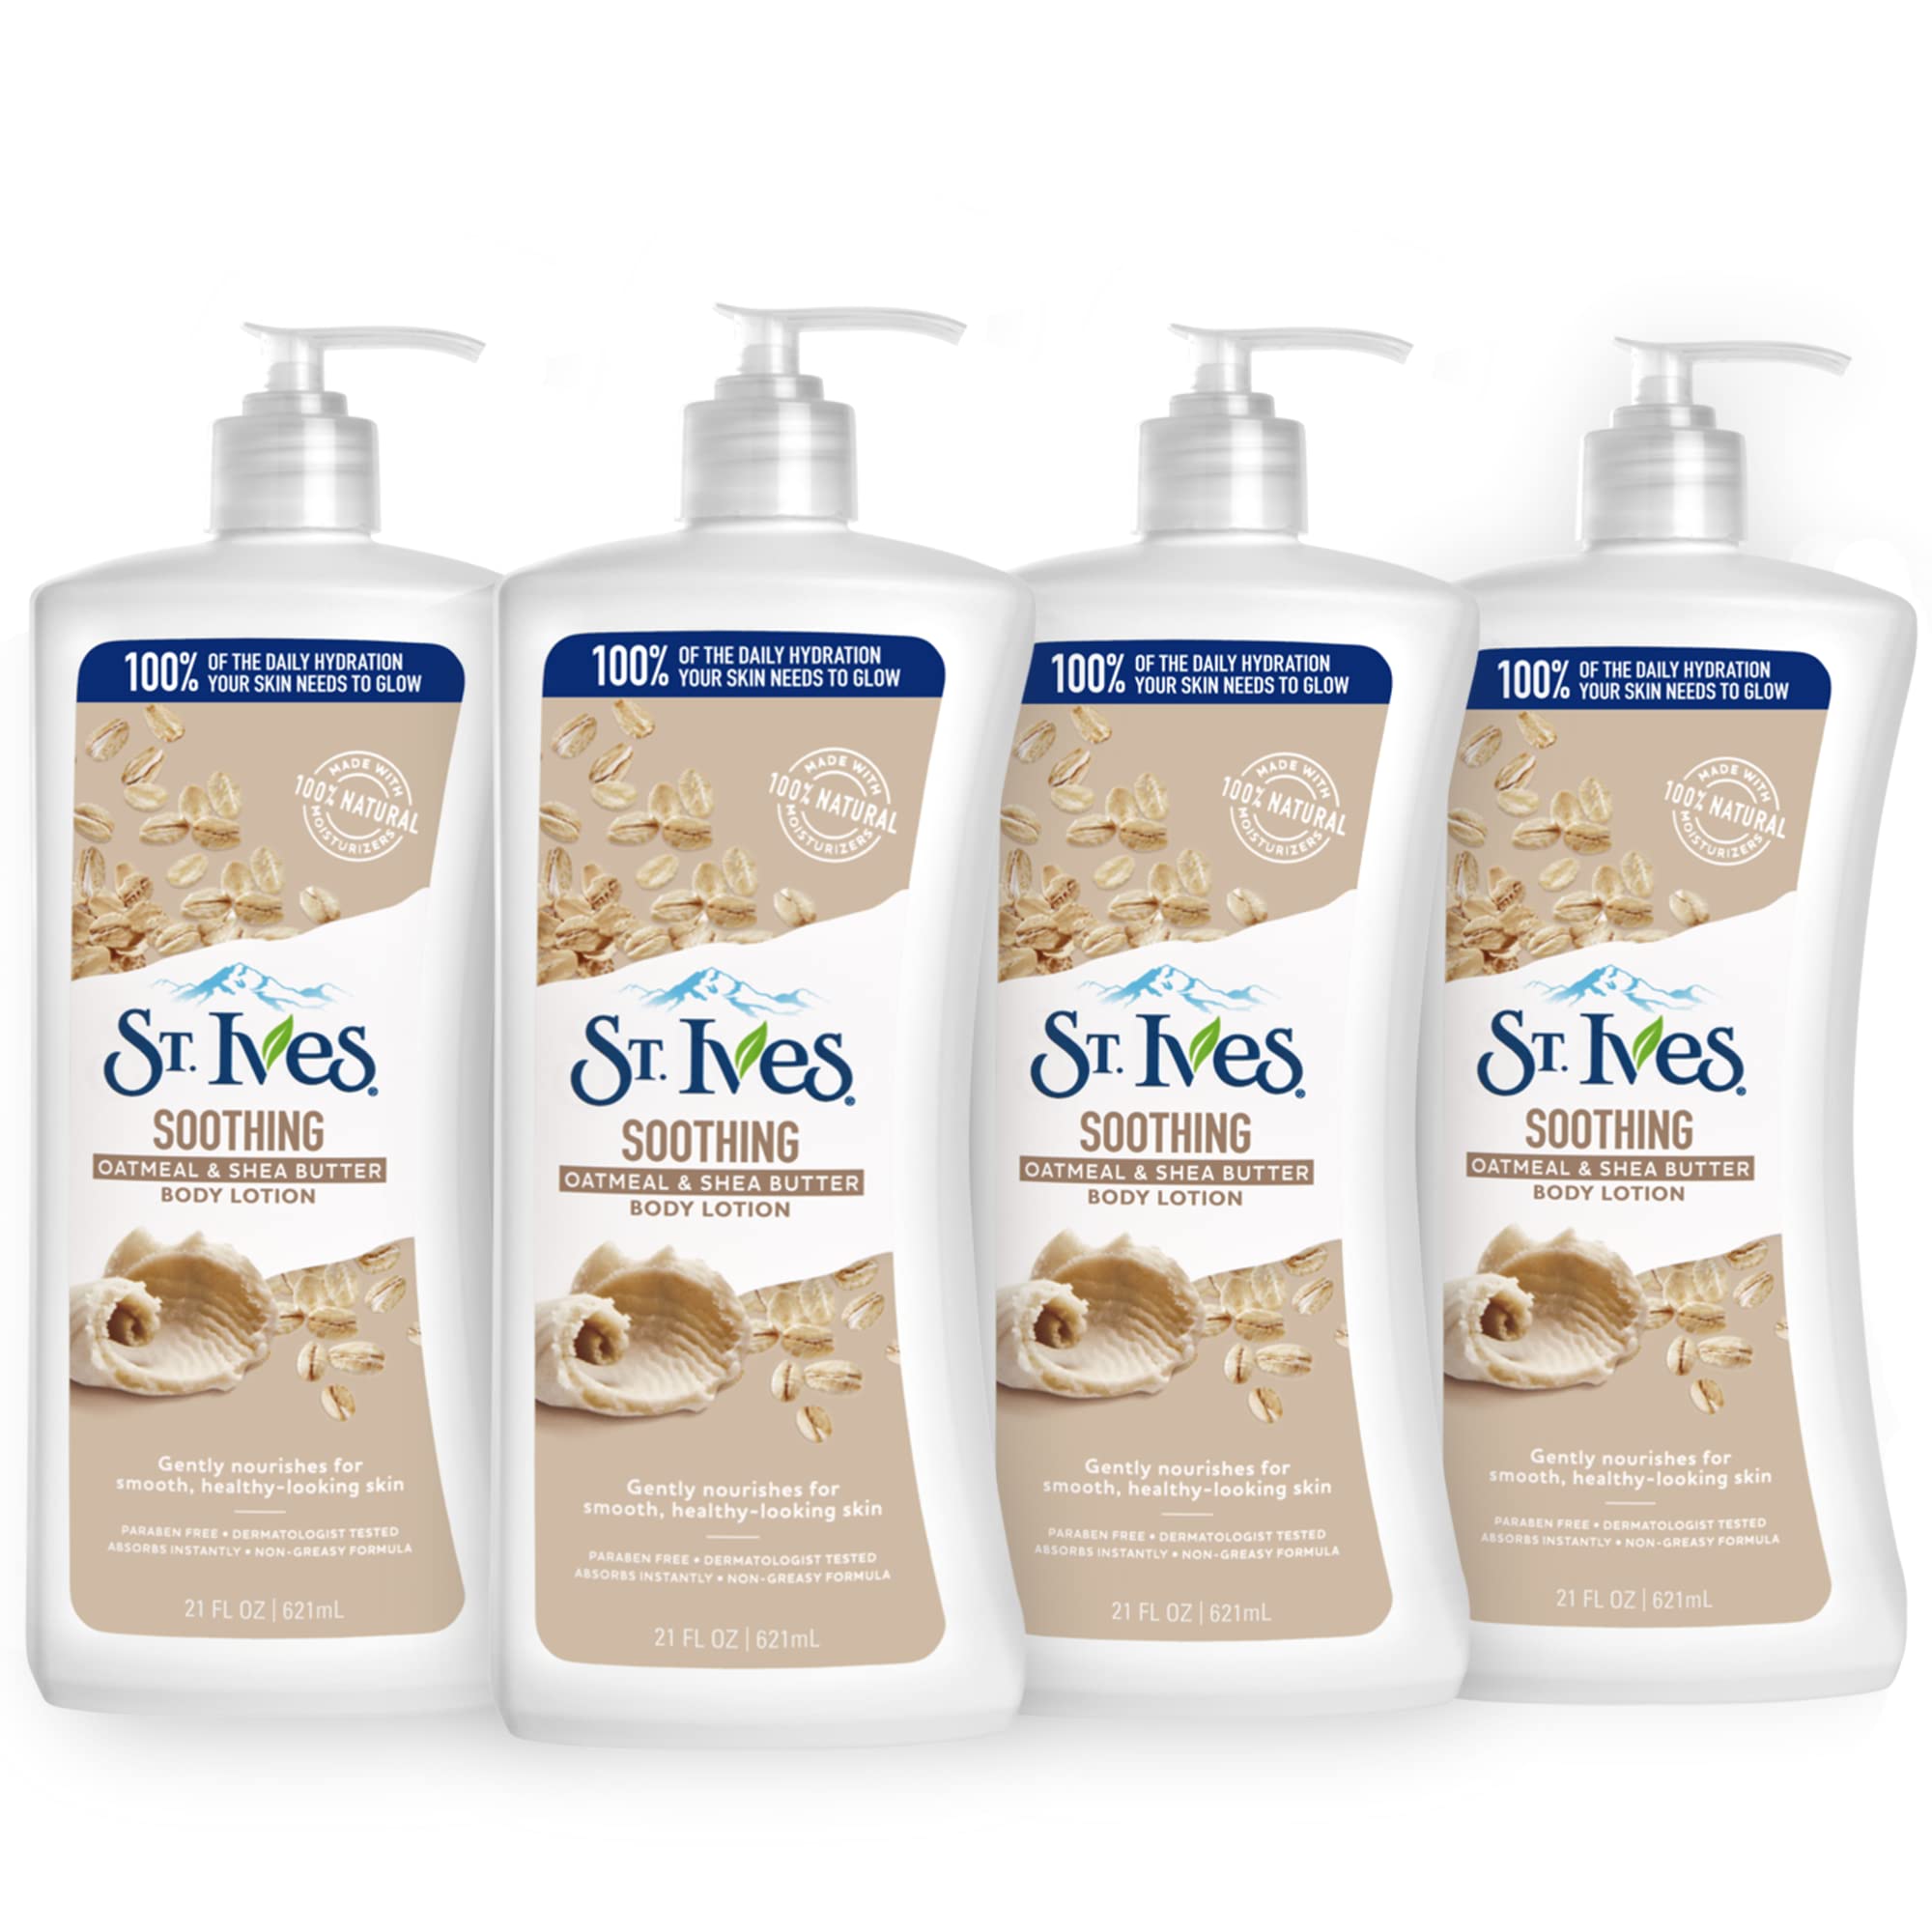 4-Pack 21-Oz St. Ives Renewing Hand & Body Lotion Moisturizer (Oatmeal and Shea Butter) $12.77 ($3.20 each) w/ S&S + F/S w/ Prime or on Orders $25+